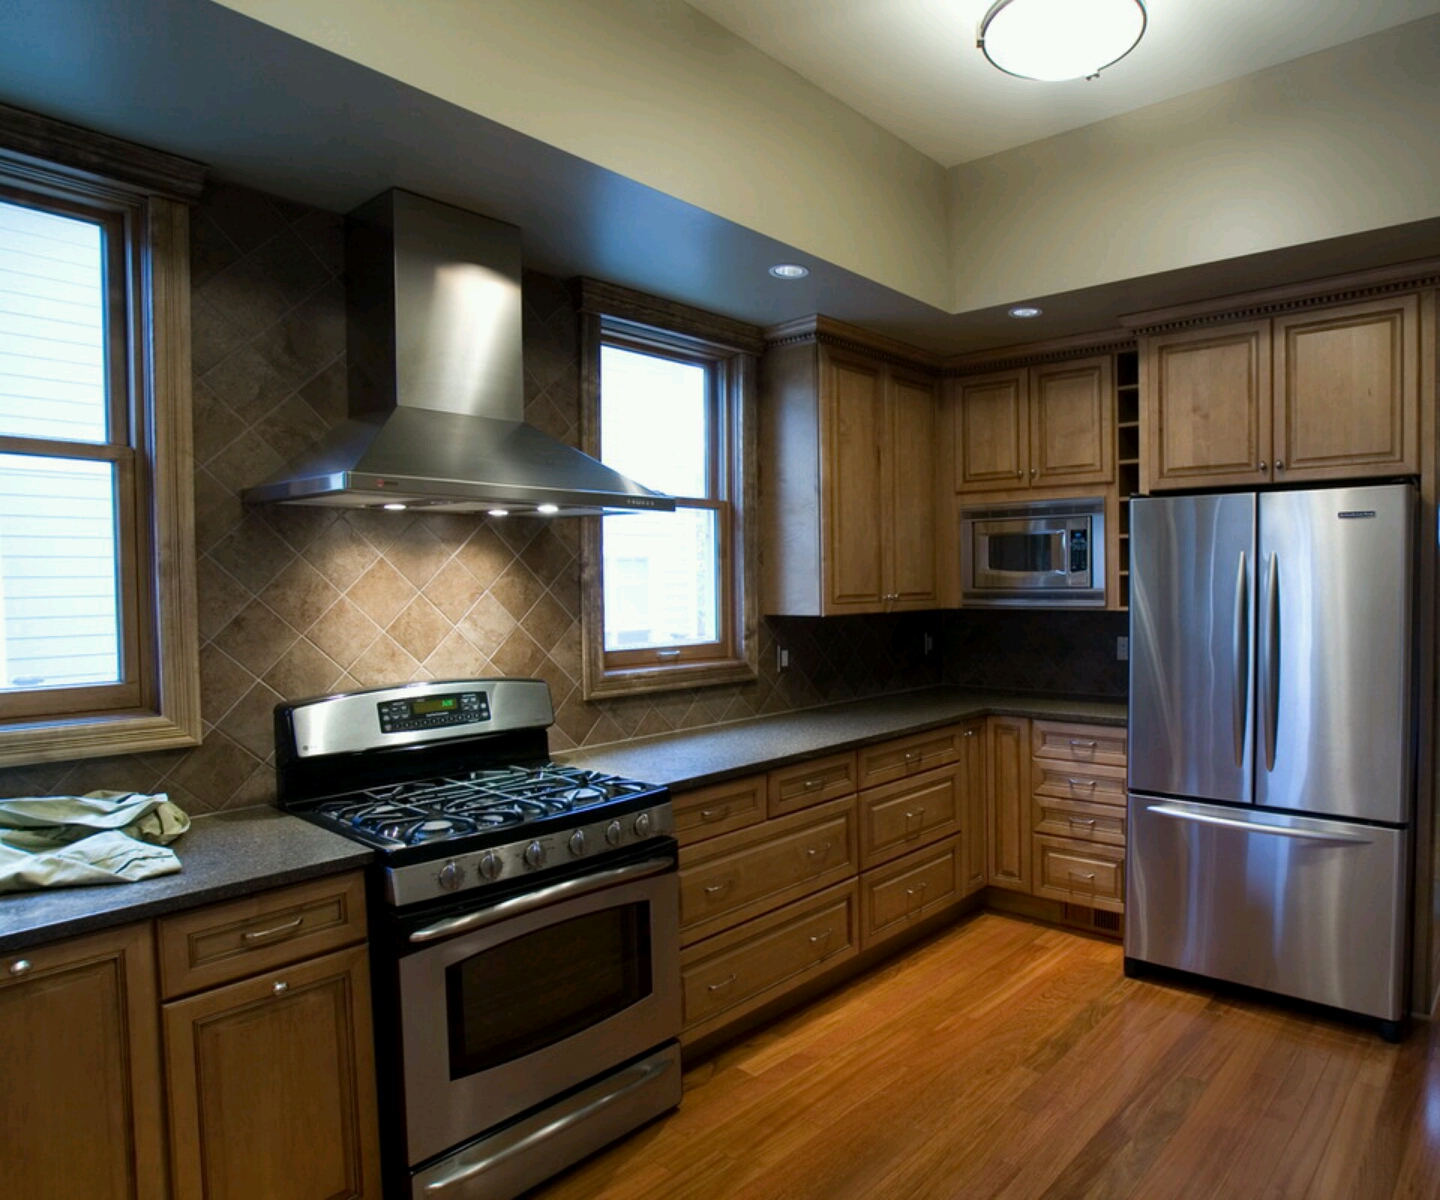 kitchen design remodeling stainless steel